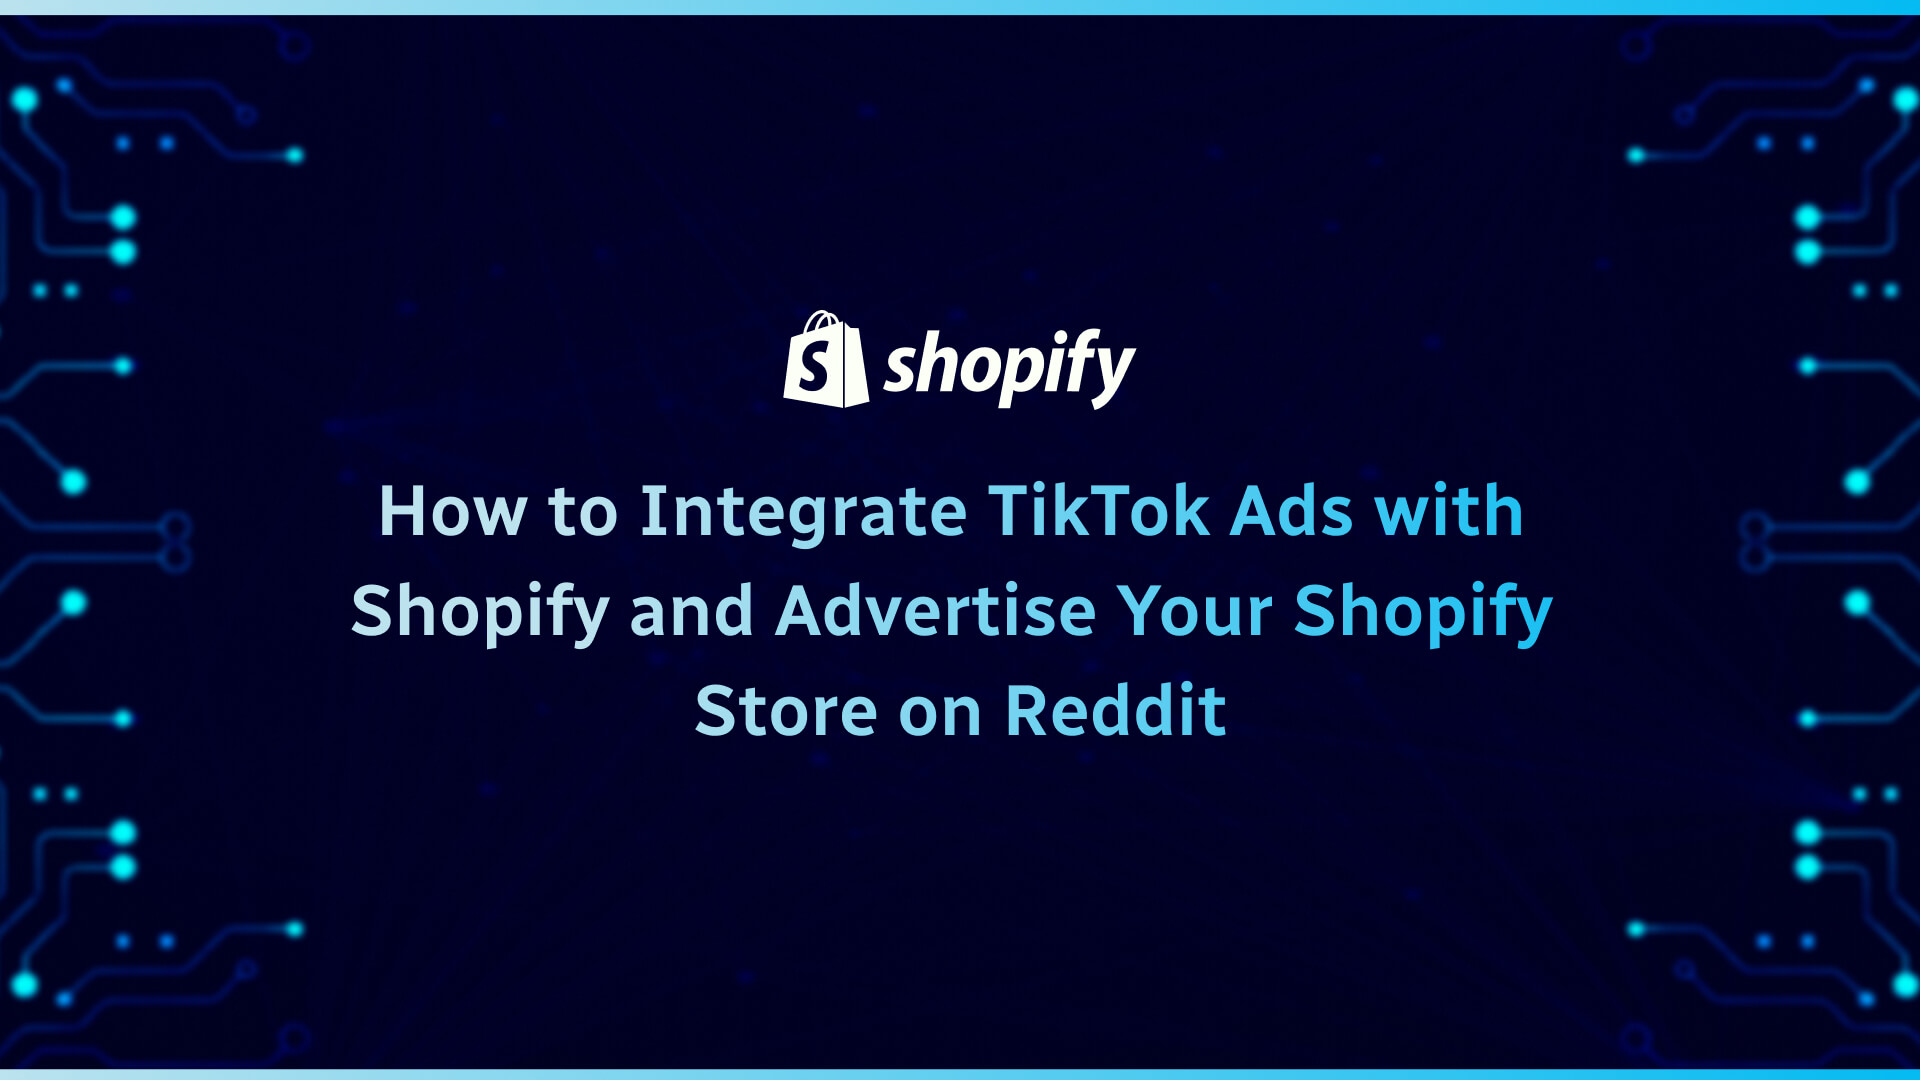 How to Integrate TikTok Ads with Shopify and Advertise Your Shopify Store on Reddit